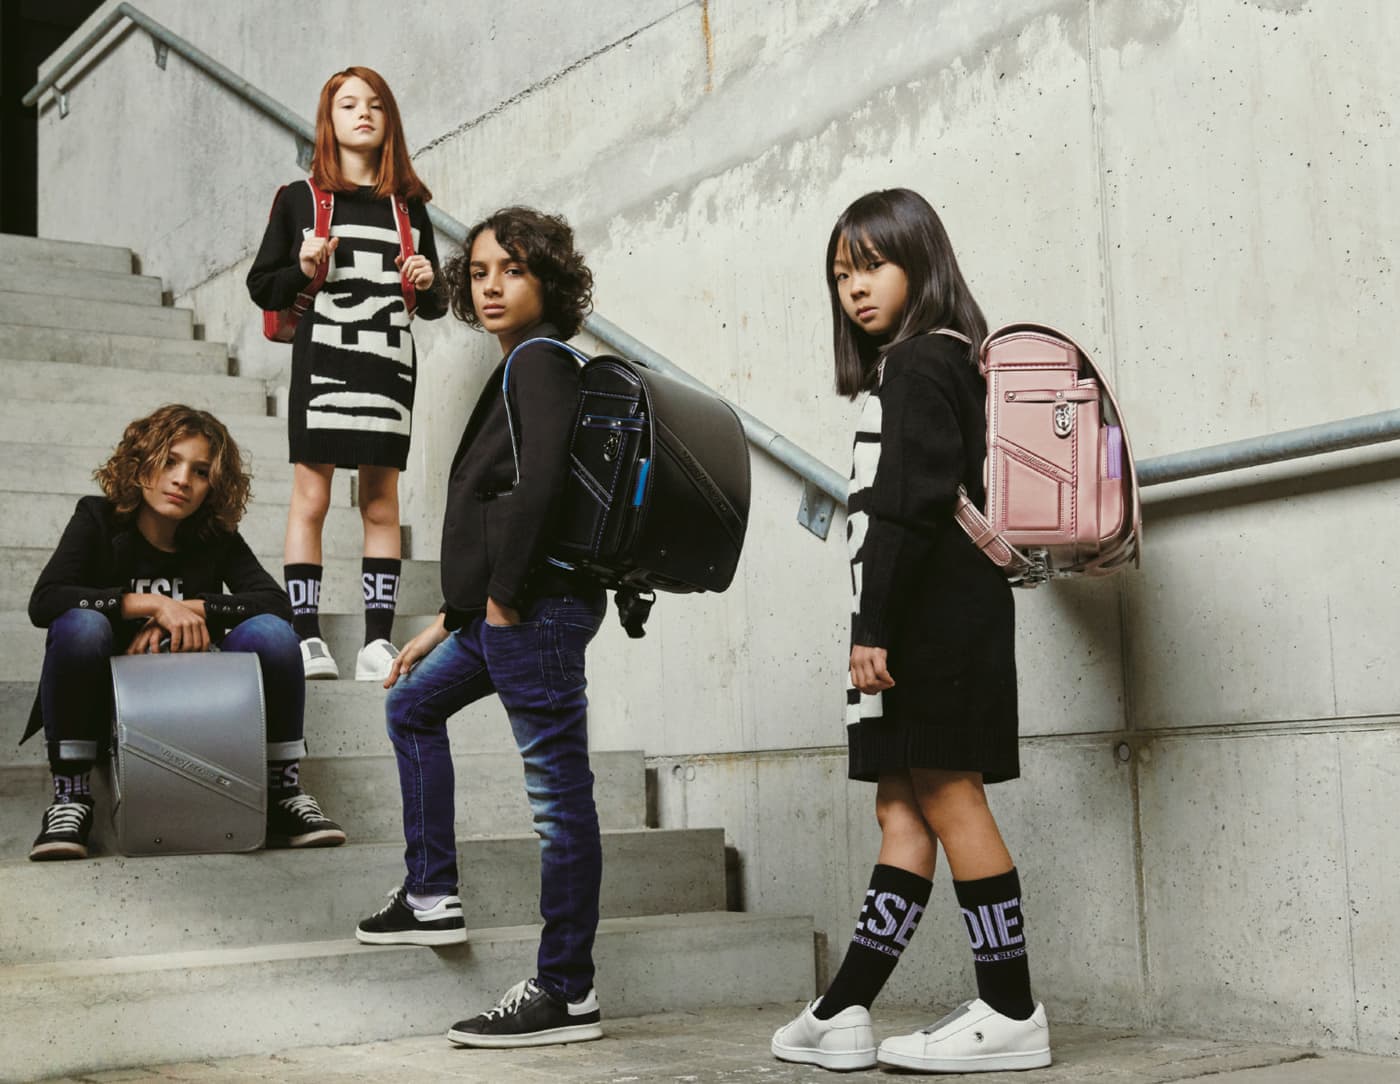 Diesel for Randoseru backpacks’ collection.
Randoseru represents for Japanese children the start of a new phase in life upon beginning their first year of school.
Riccardo Polcaro, fotografo moda bambino.